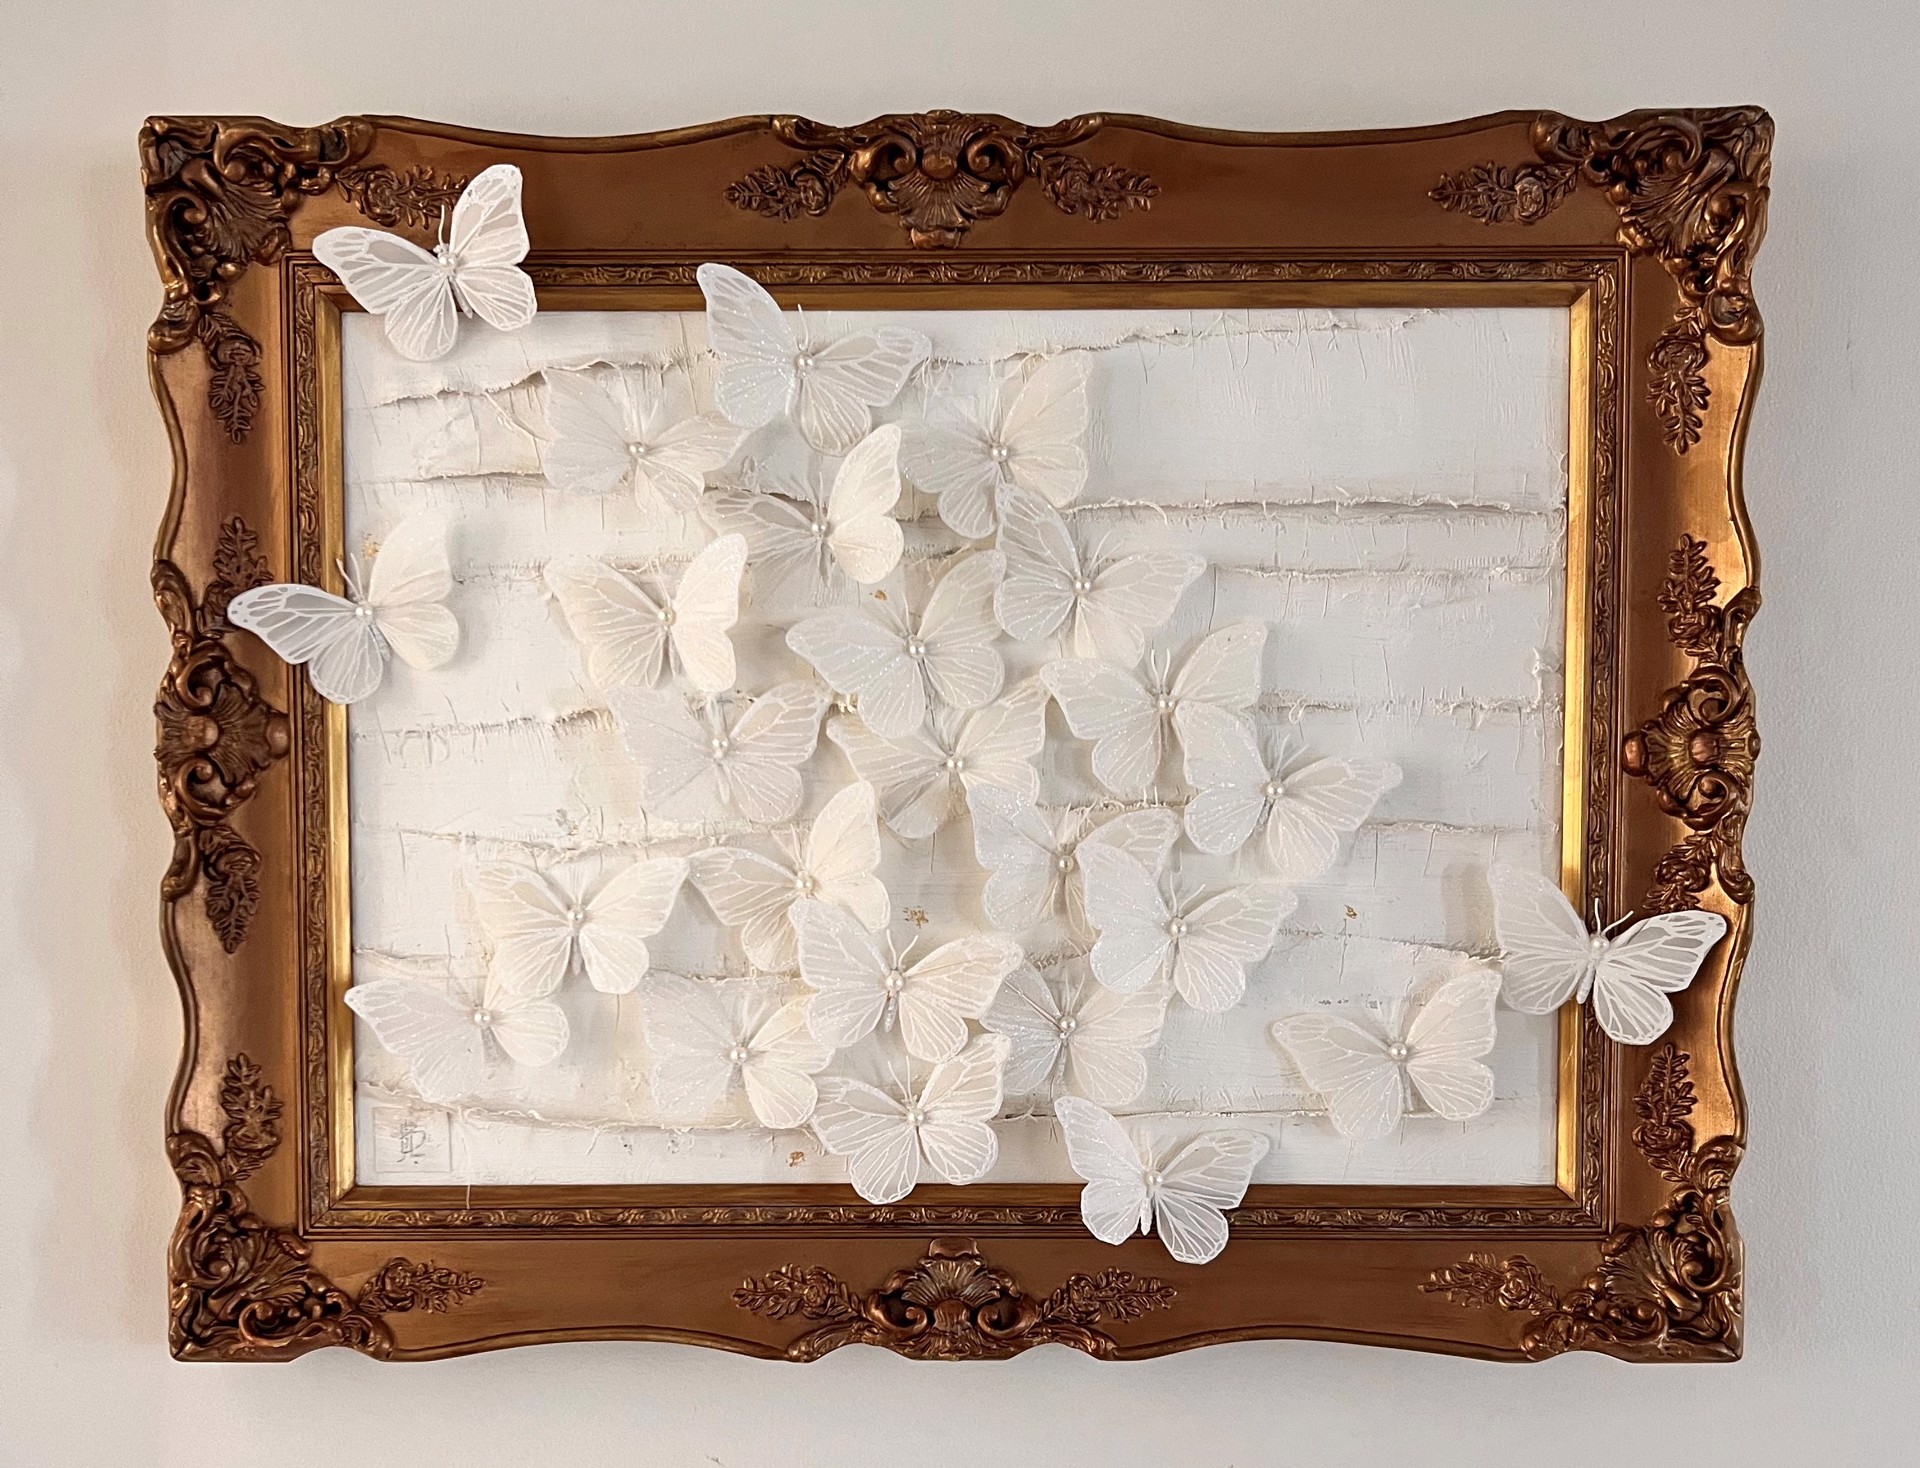 Composition with Butterflies No. 1 by Leslie Poteet Busker